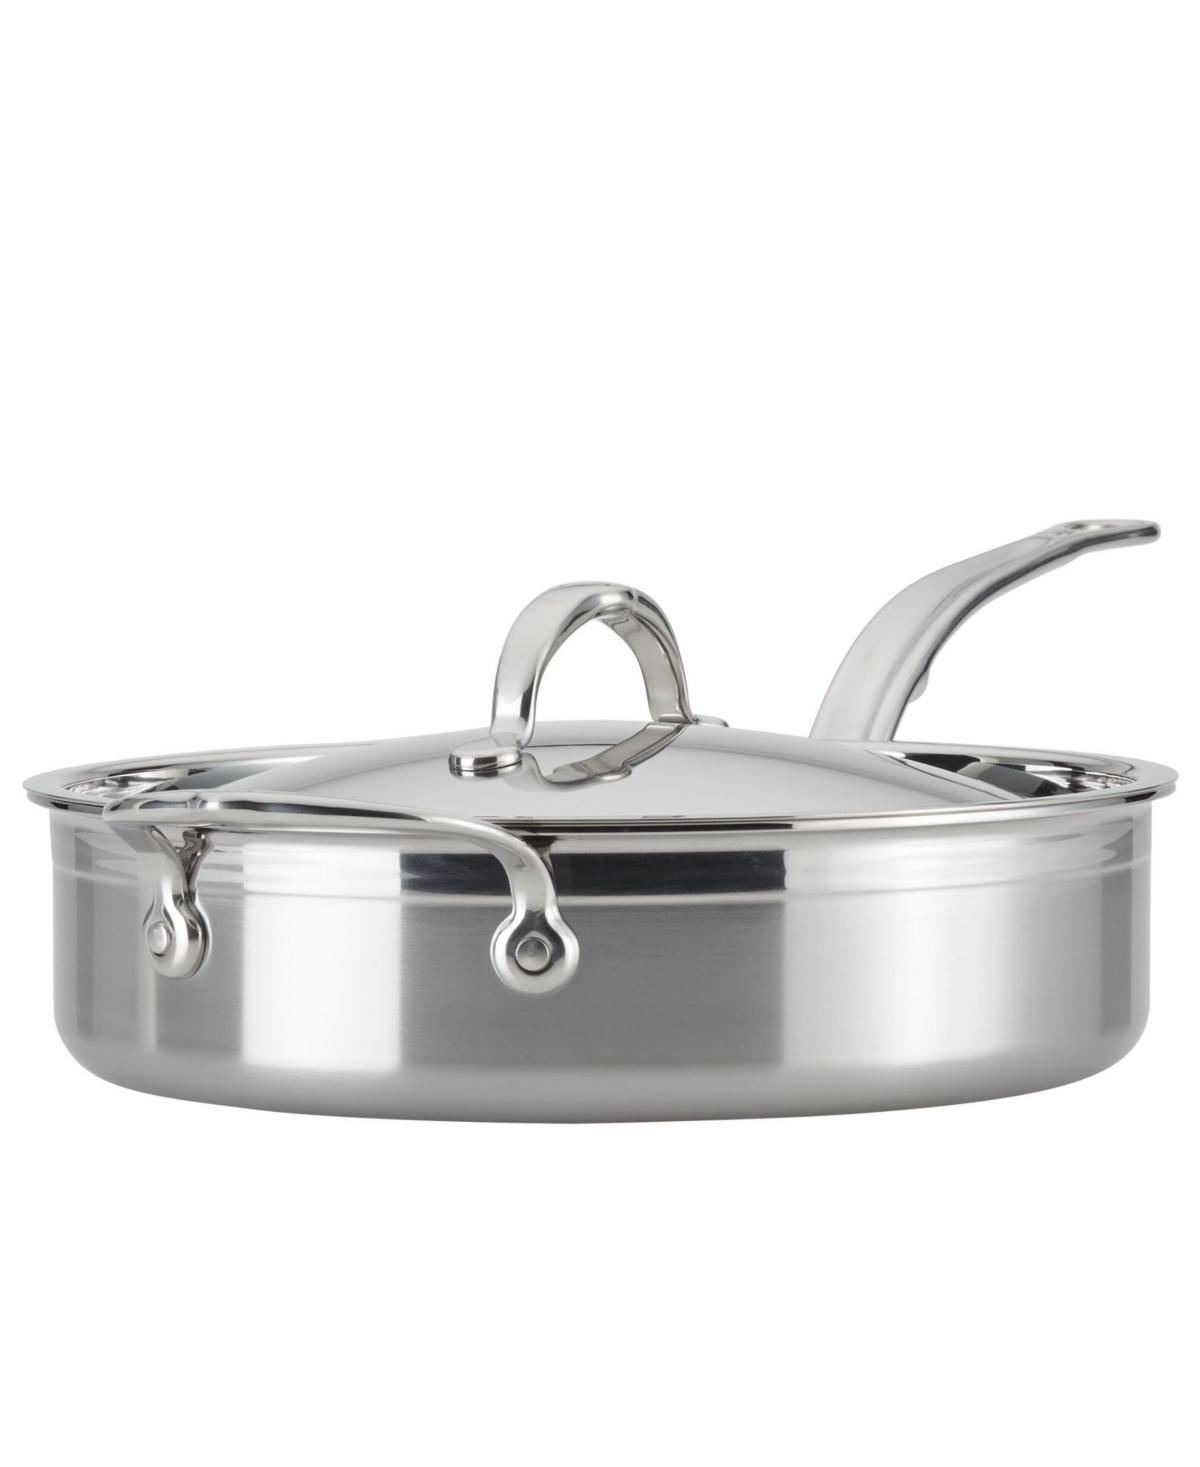 Shop Hestan Probond Clad Stainless Steel 3.5-quart Covered Saute In Silver